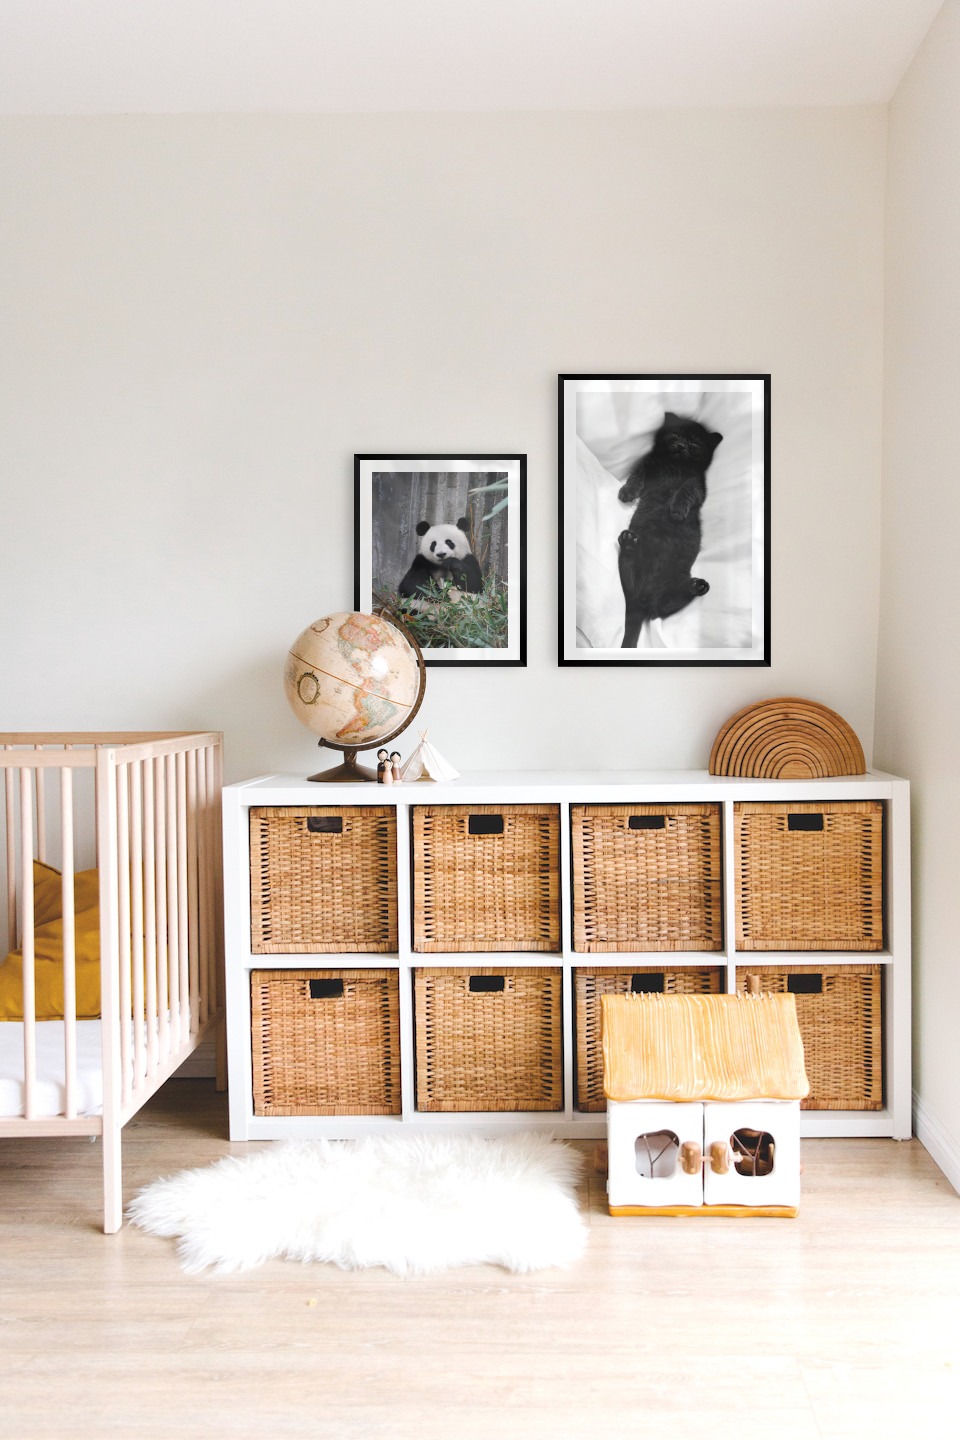 Gallery wall with picture frames in black in sizes 40x50 and 50x70 with prints "Panda" and "Cat in bed"